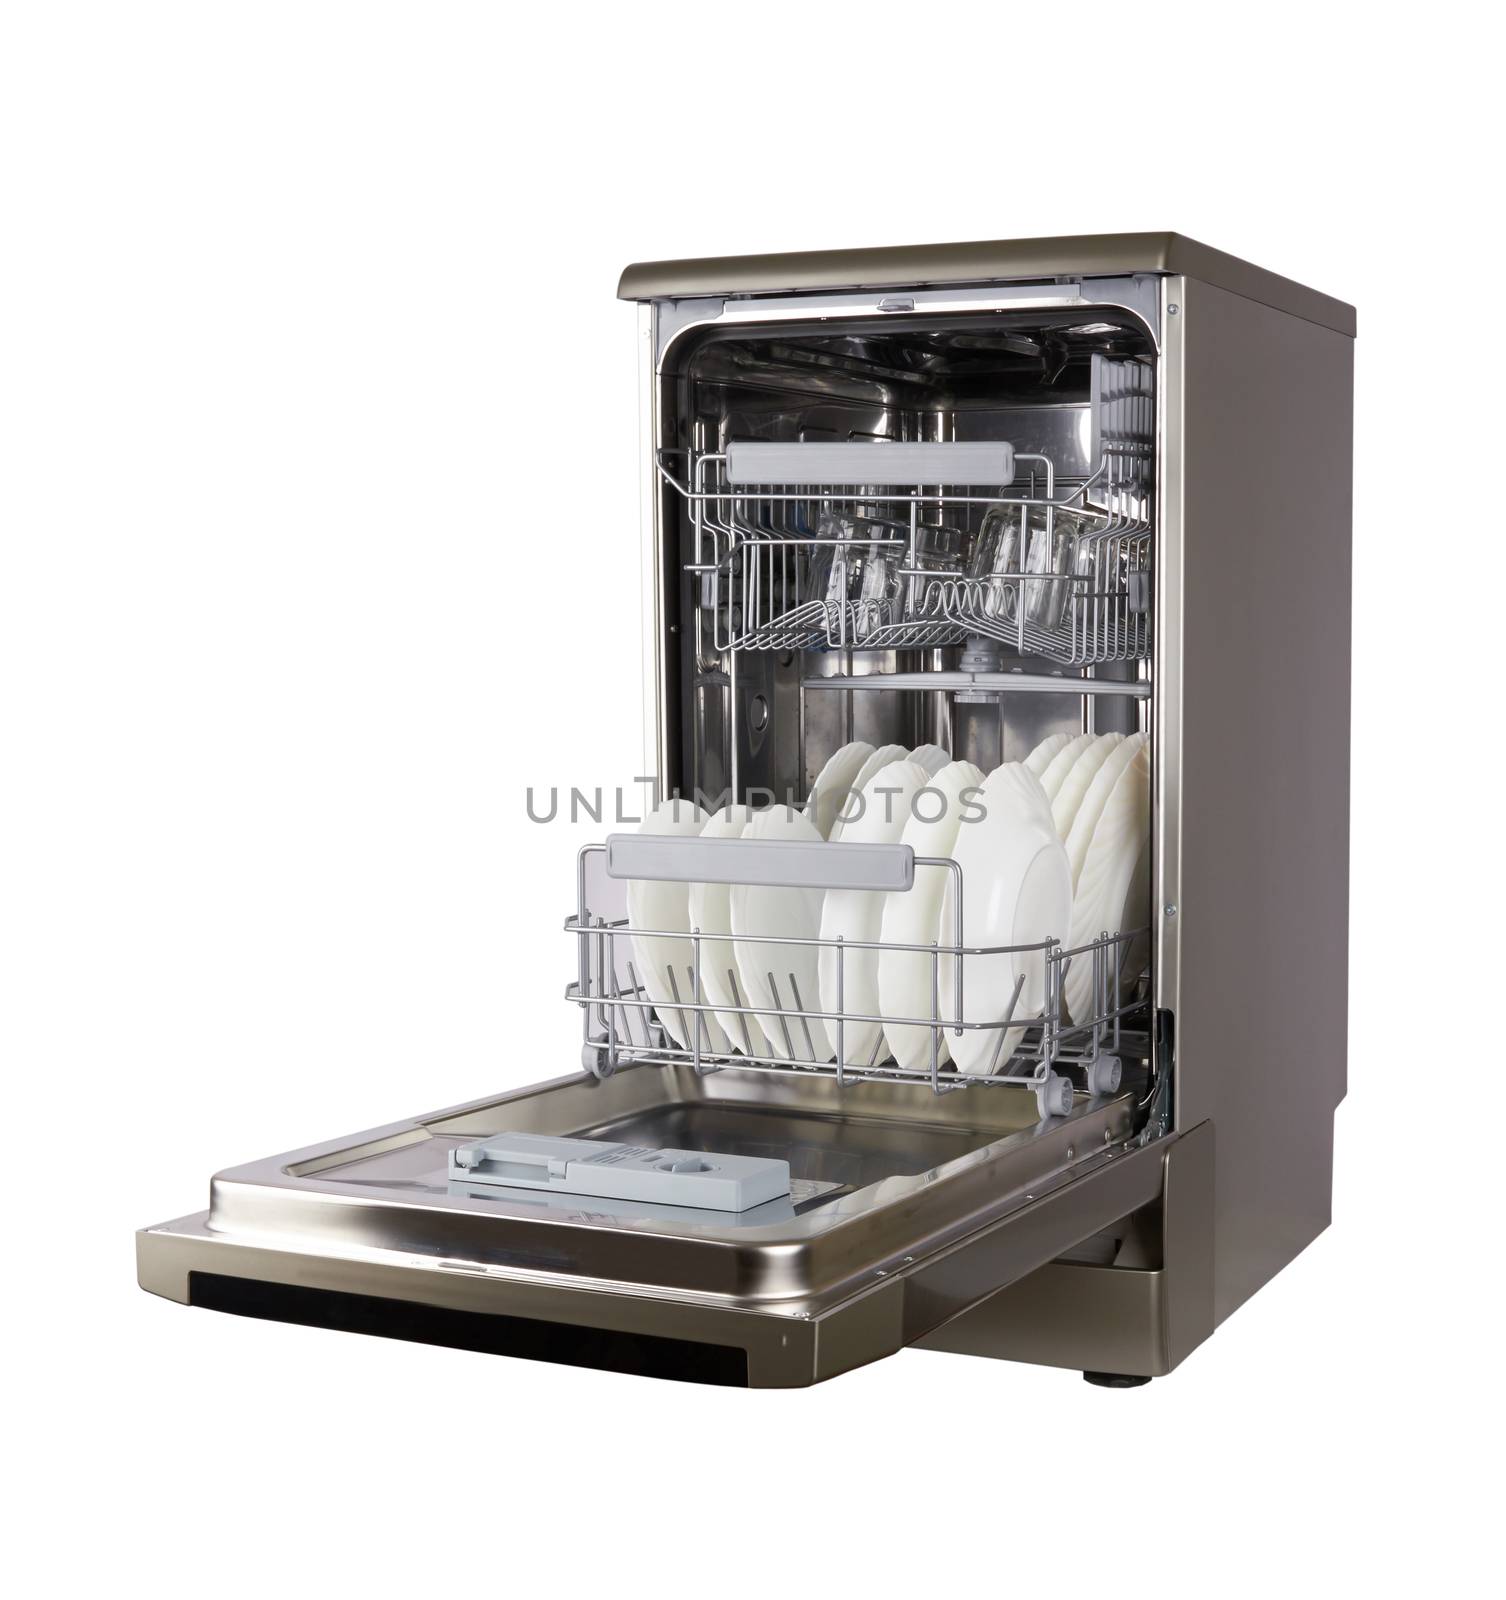 Dishwasher machine isolated by pioneer111